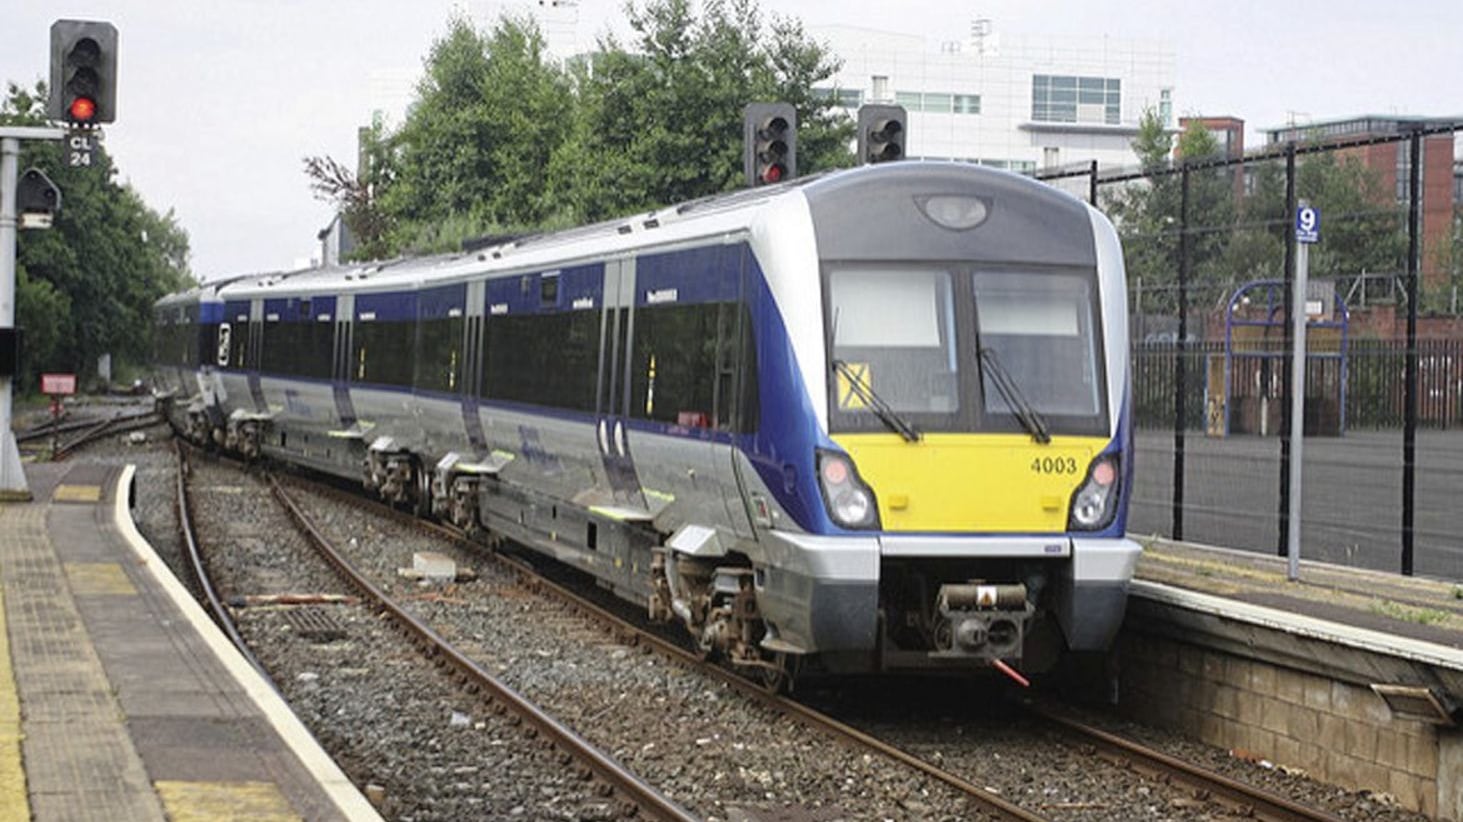 Translink will continue to operate a full bus and train service amid coronavirus crisis 